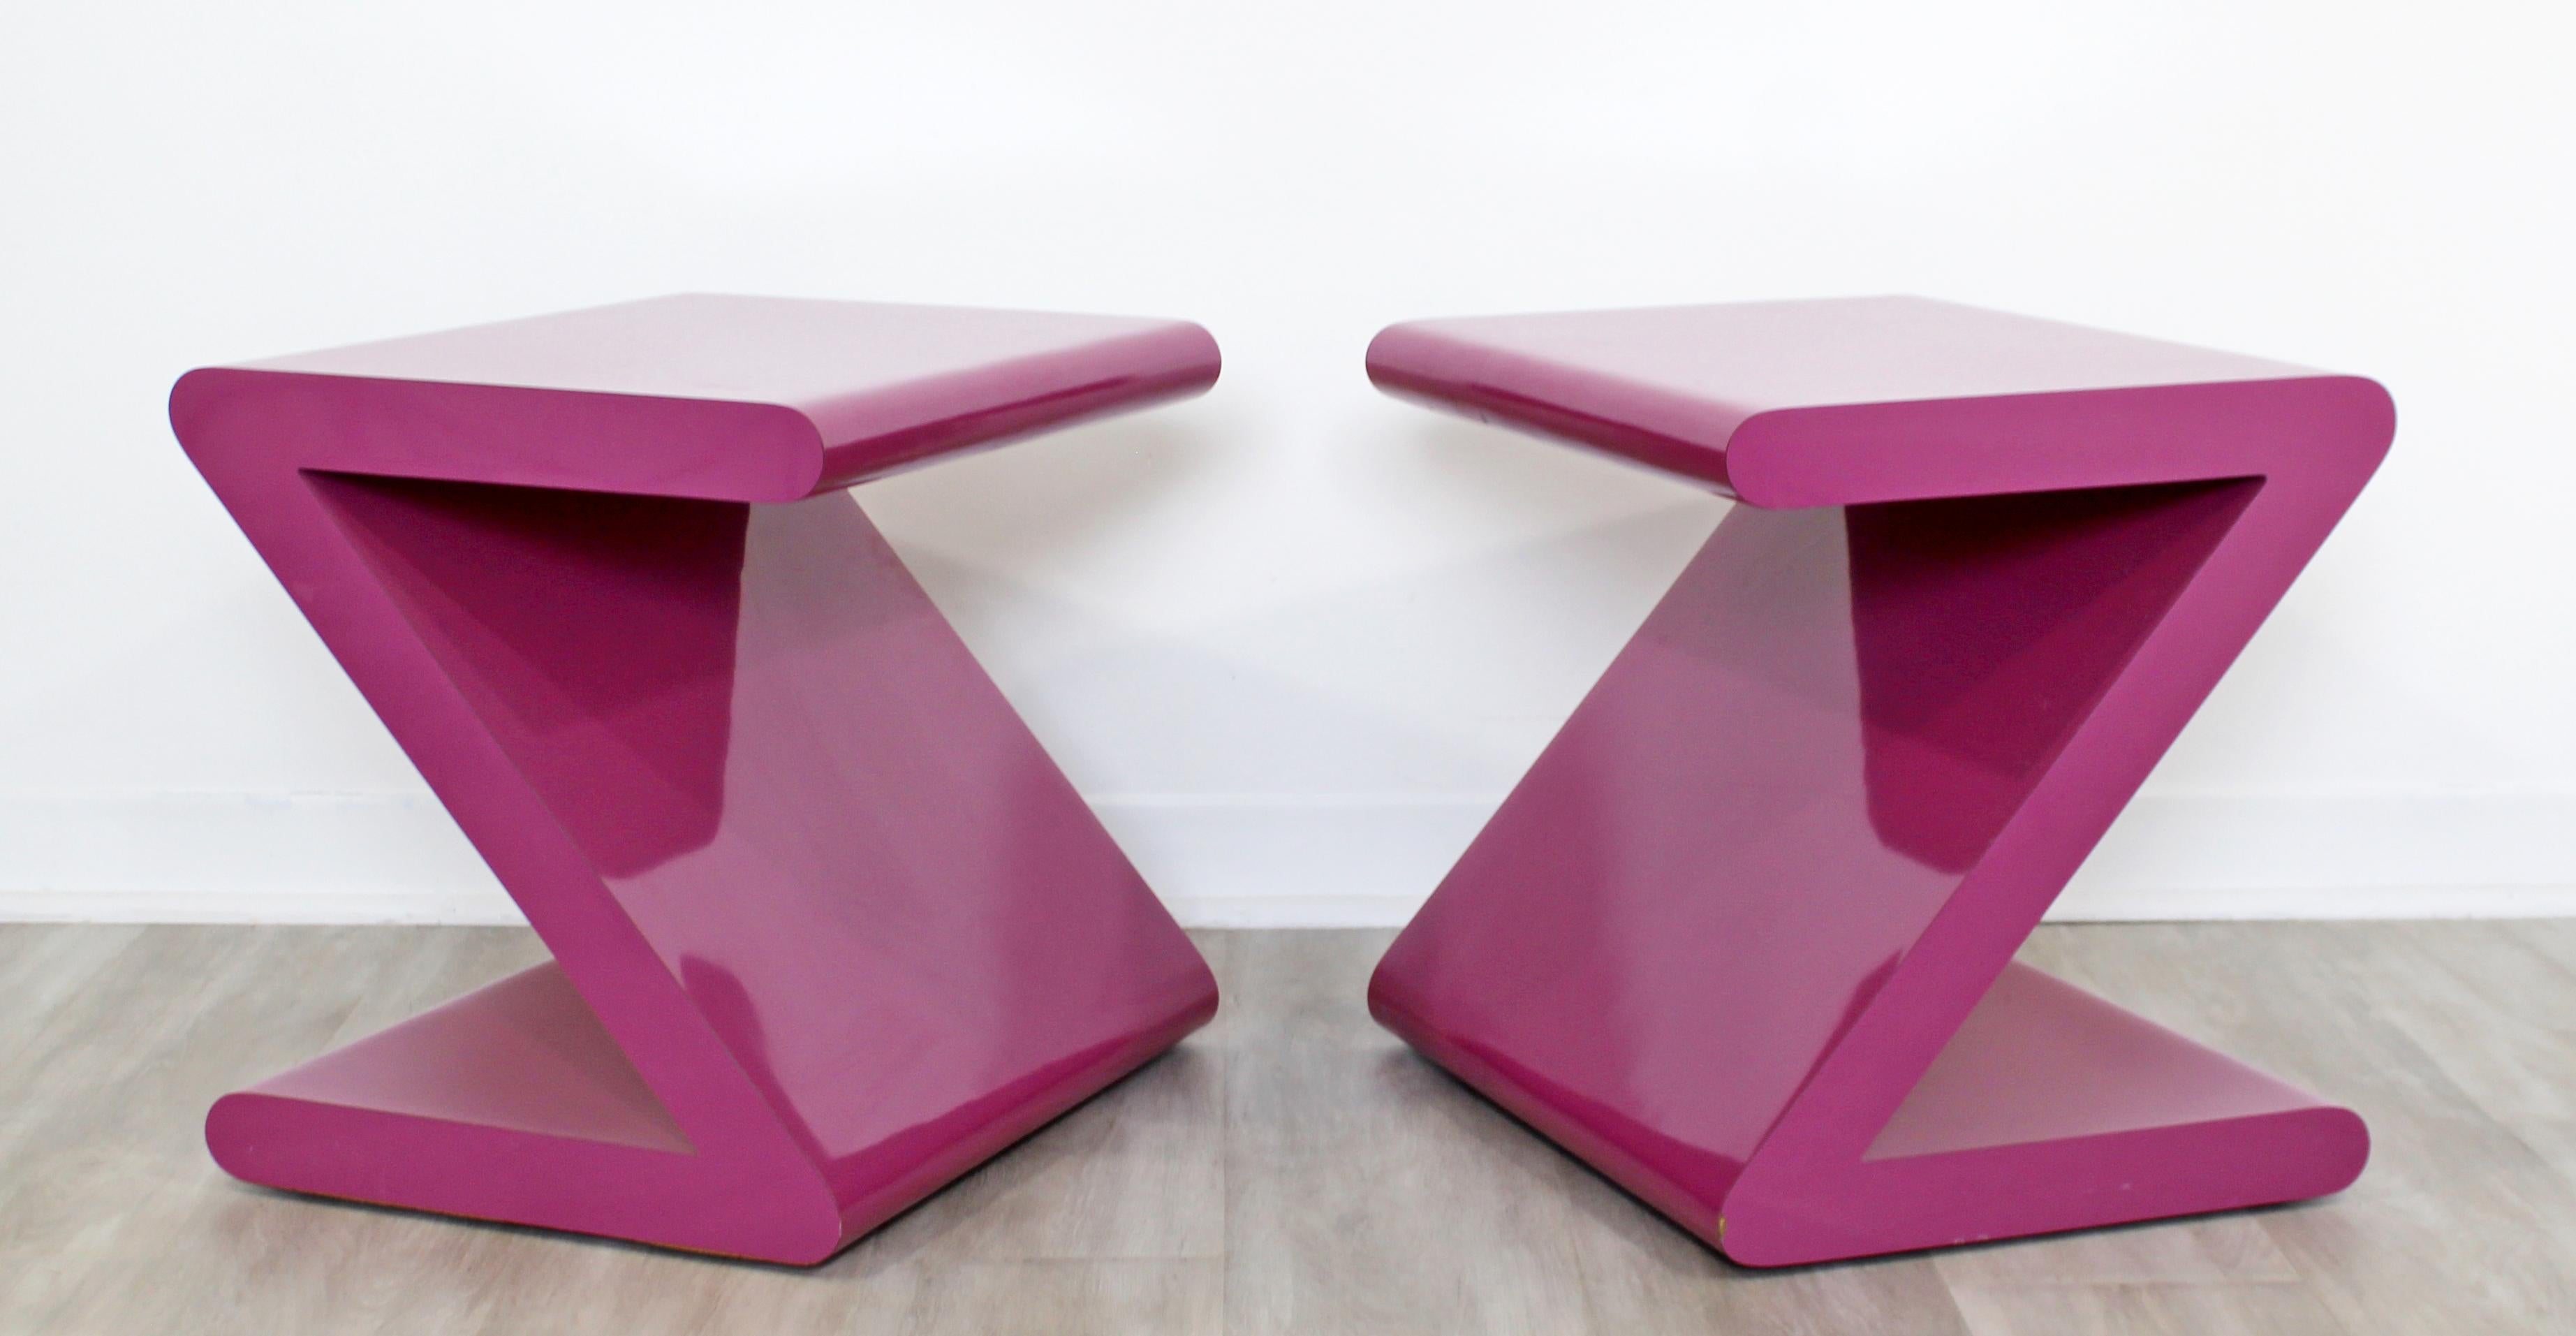 For your consideration is an absolutely fabulous pair of pink, Z-shaped acrylic side or end tables, circa 1980s. In excellent condition. The dimensions are 20